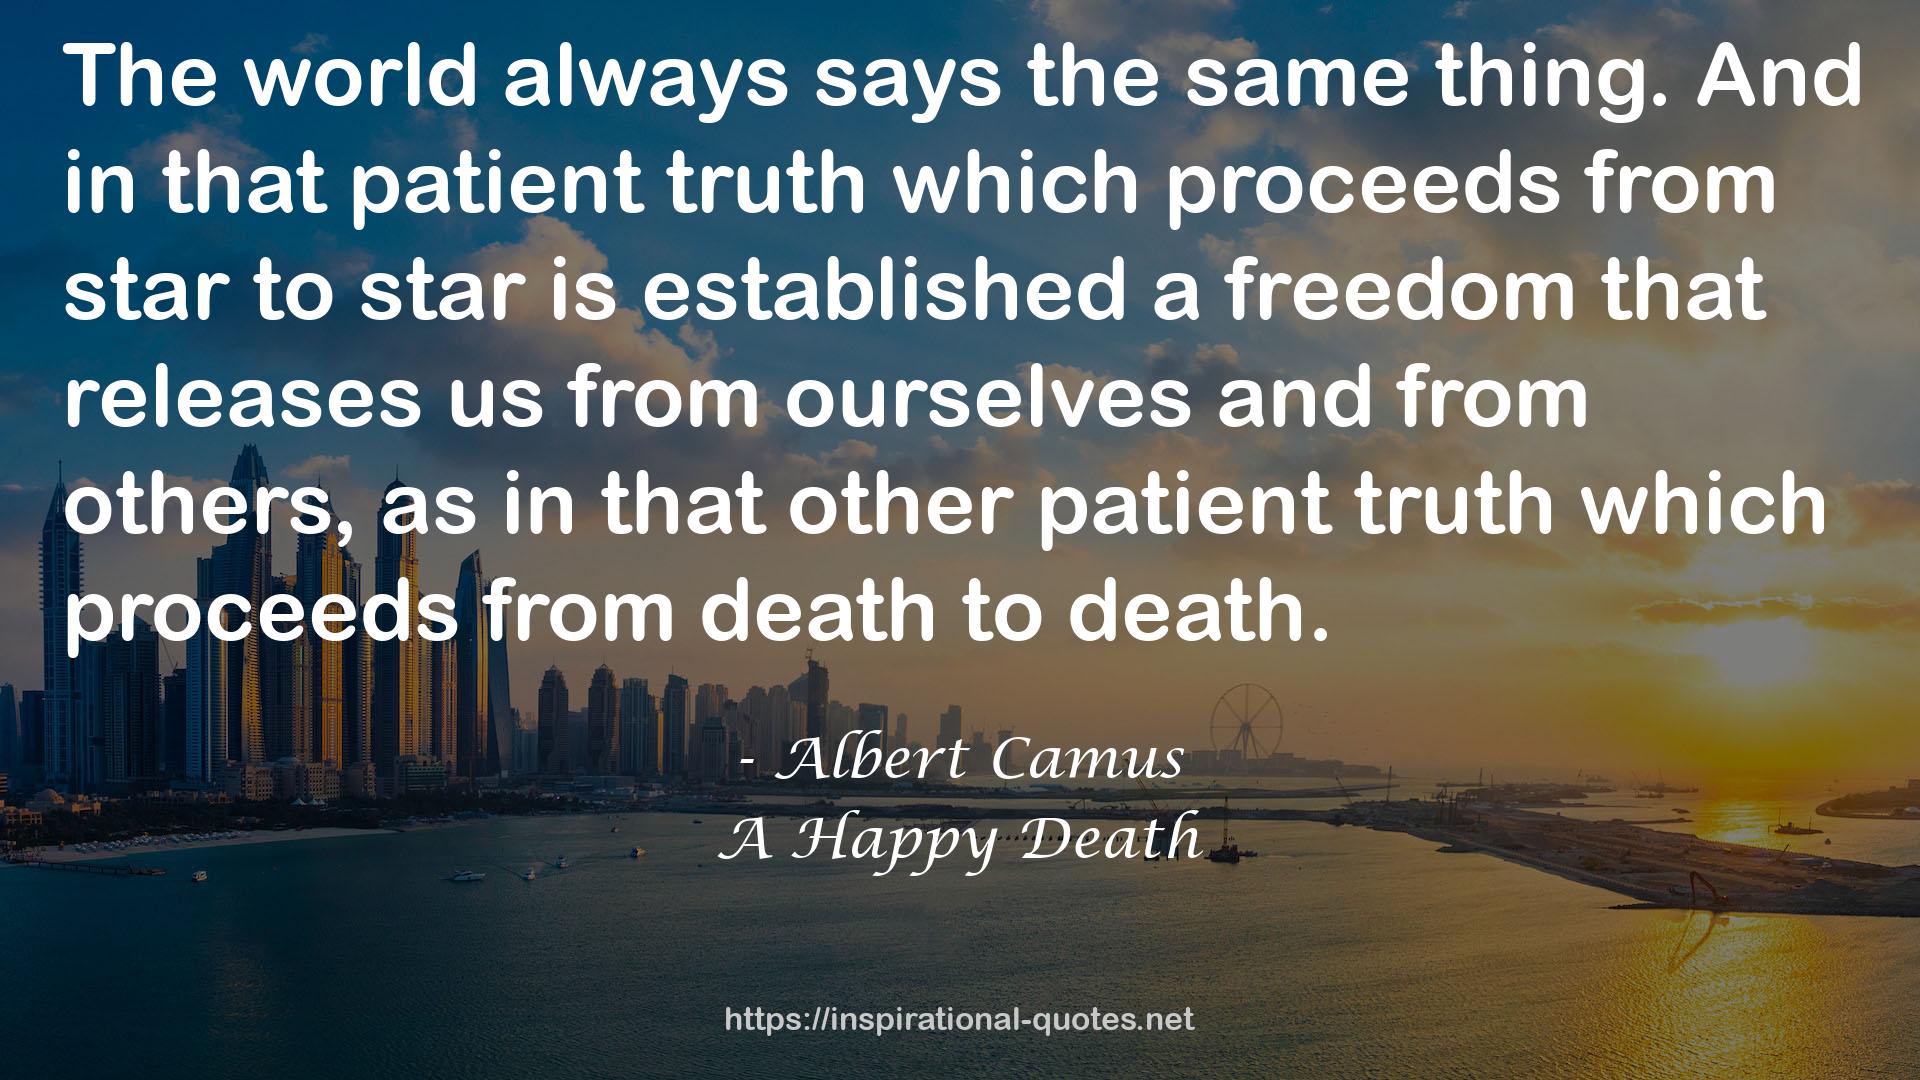 that patient truth  QUOTES